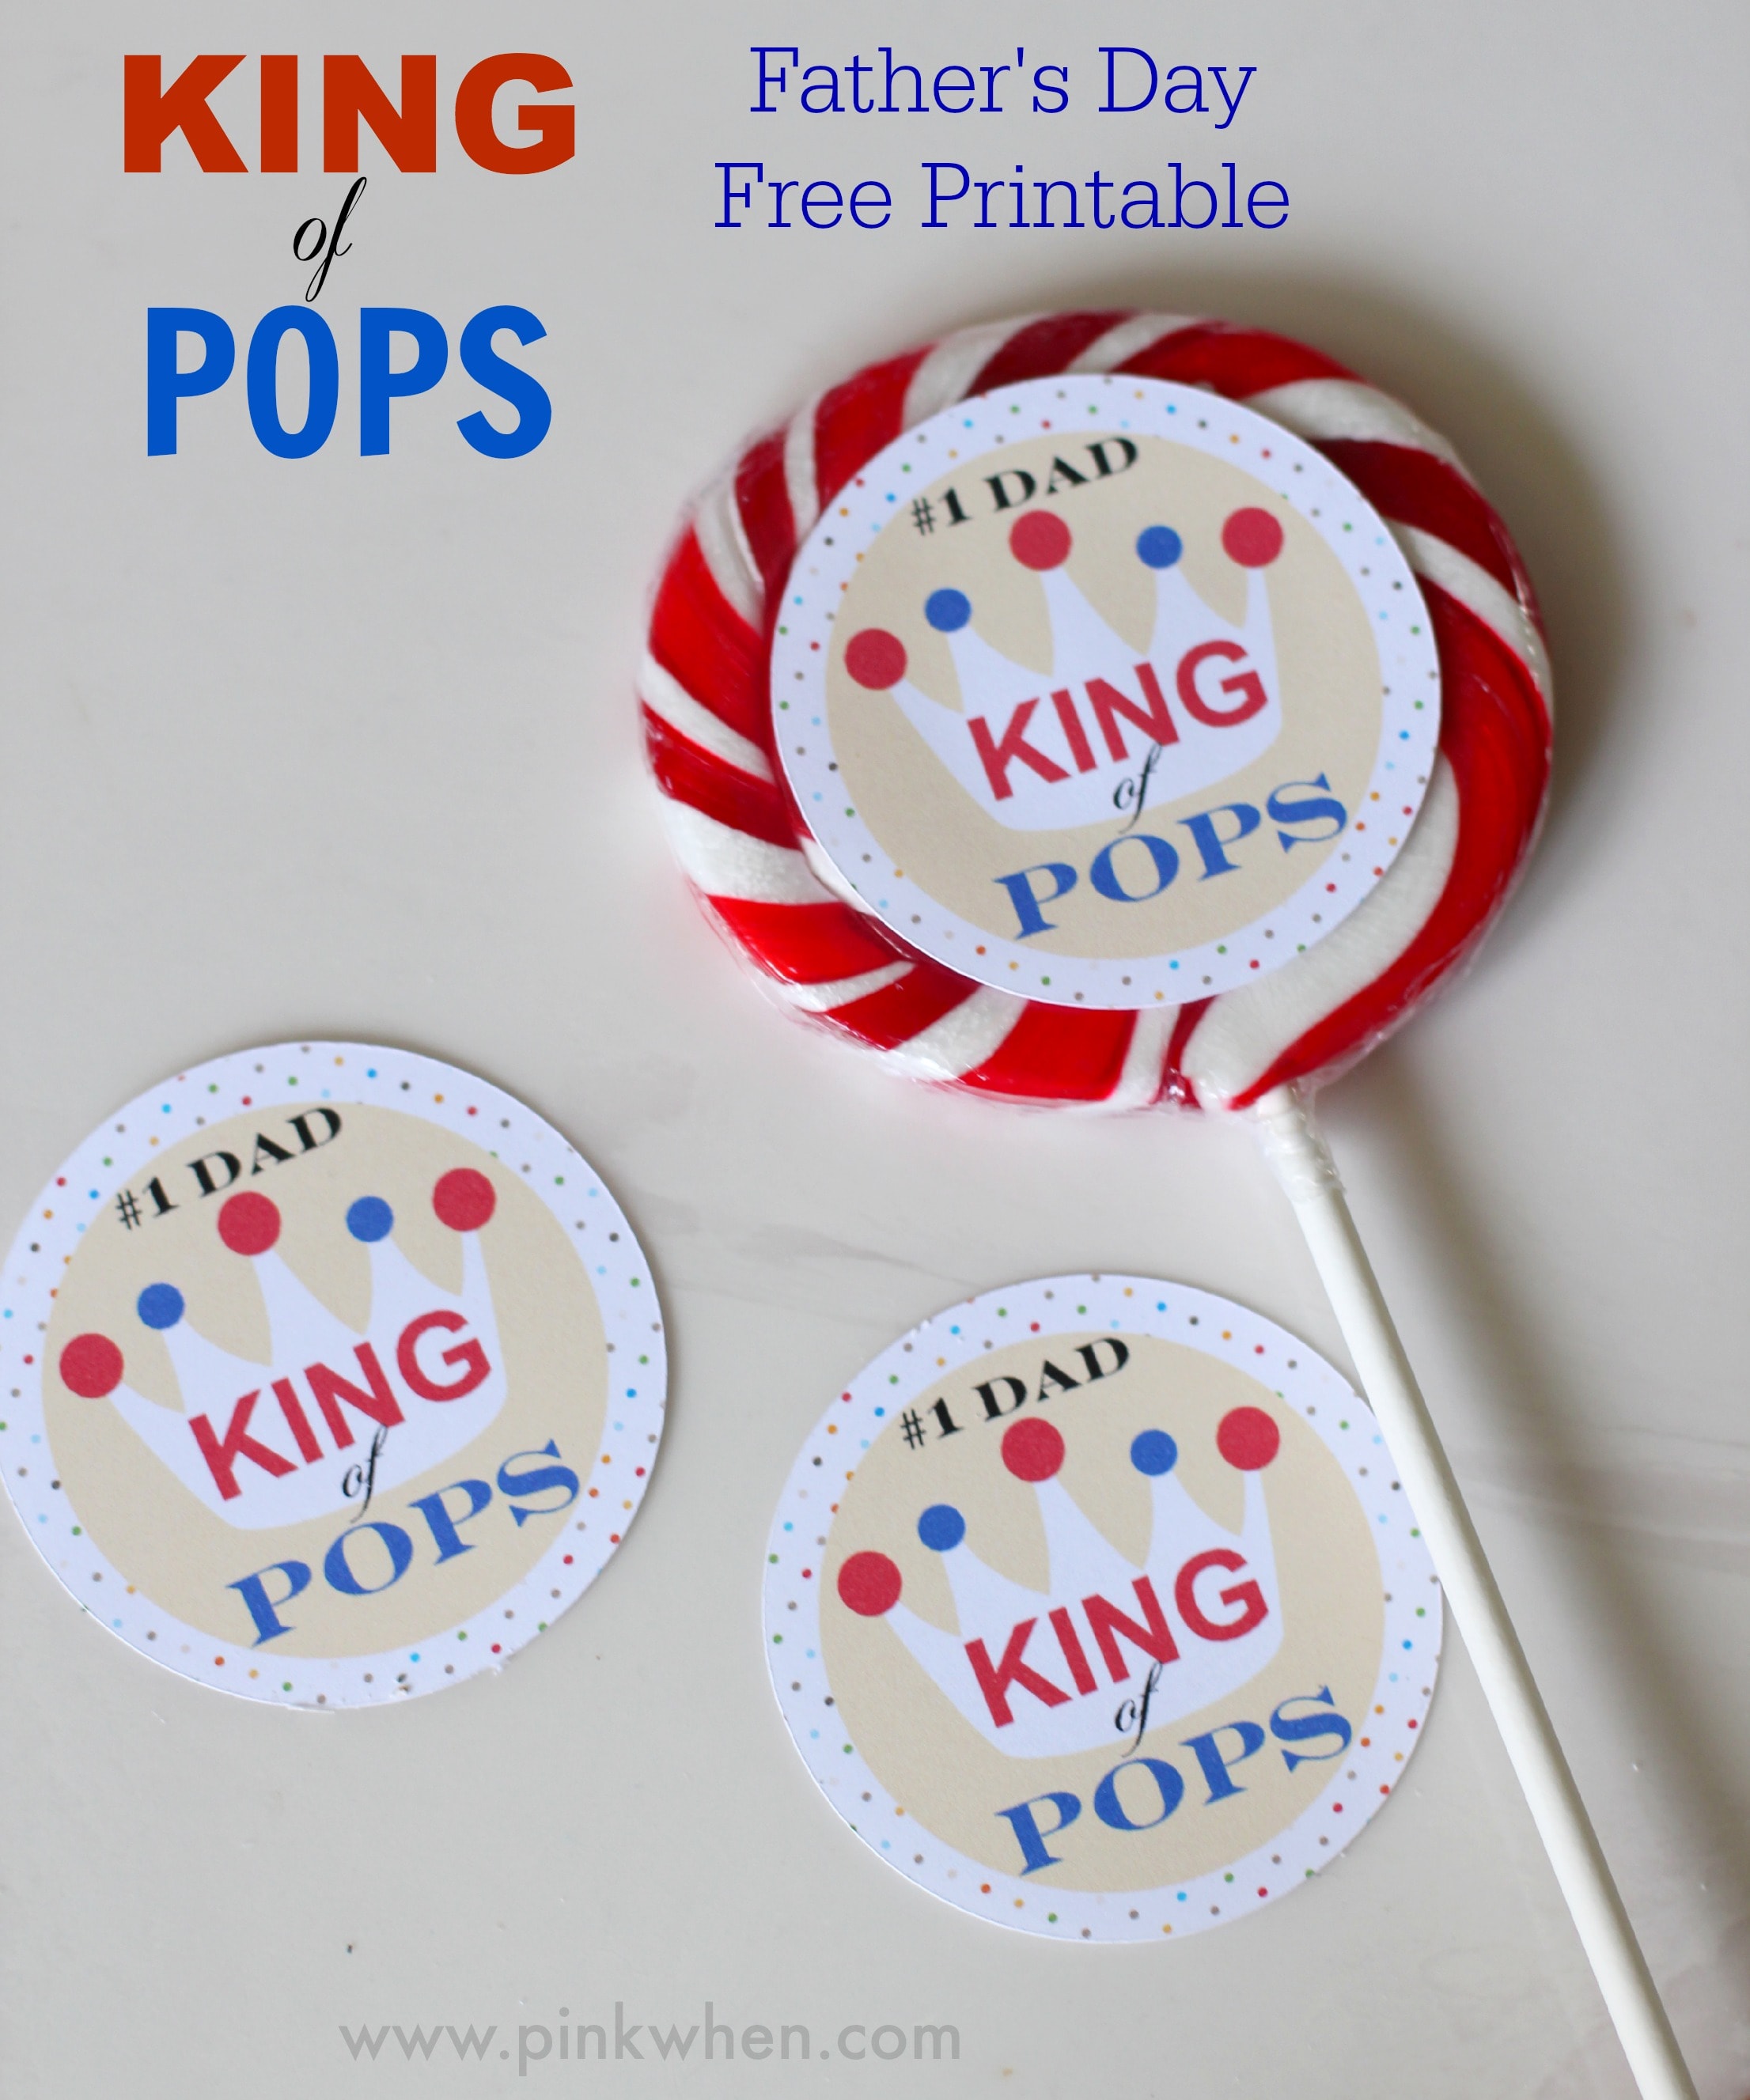 king-of-pops-father-s-day-free-printable-pinkwhen